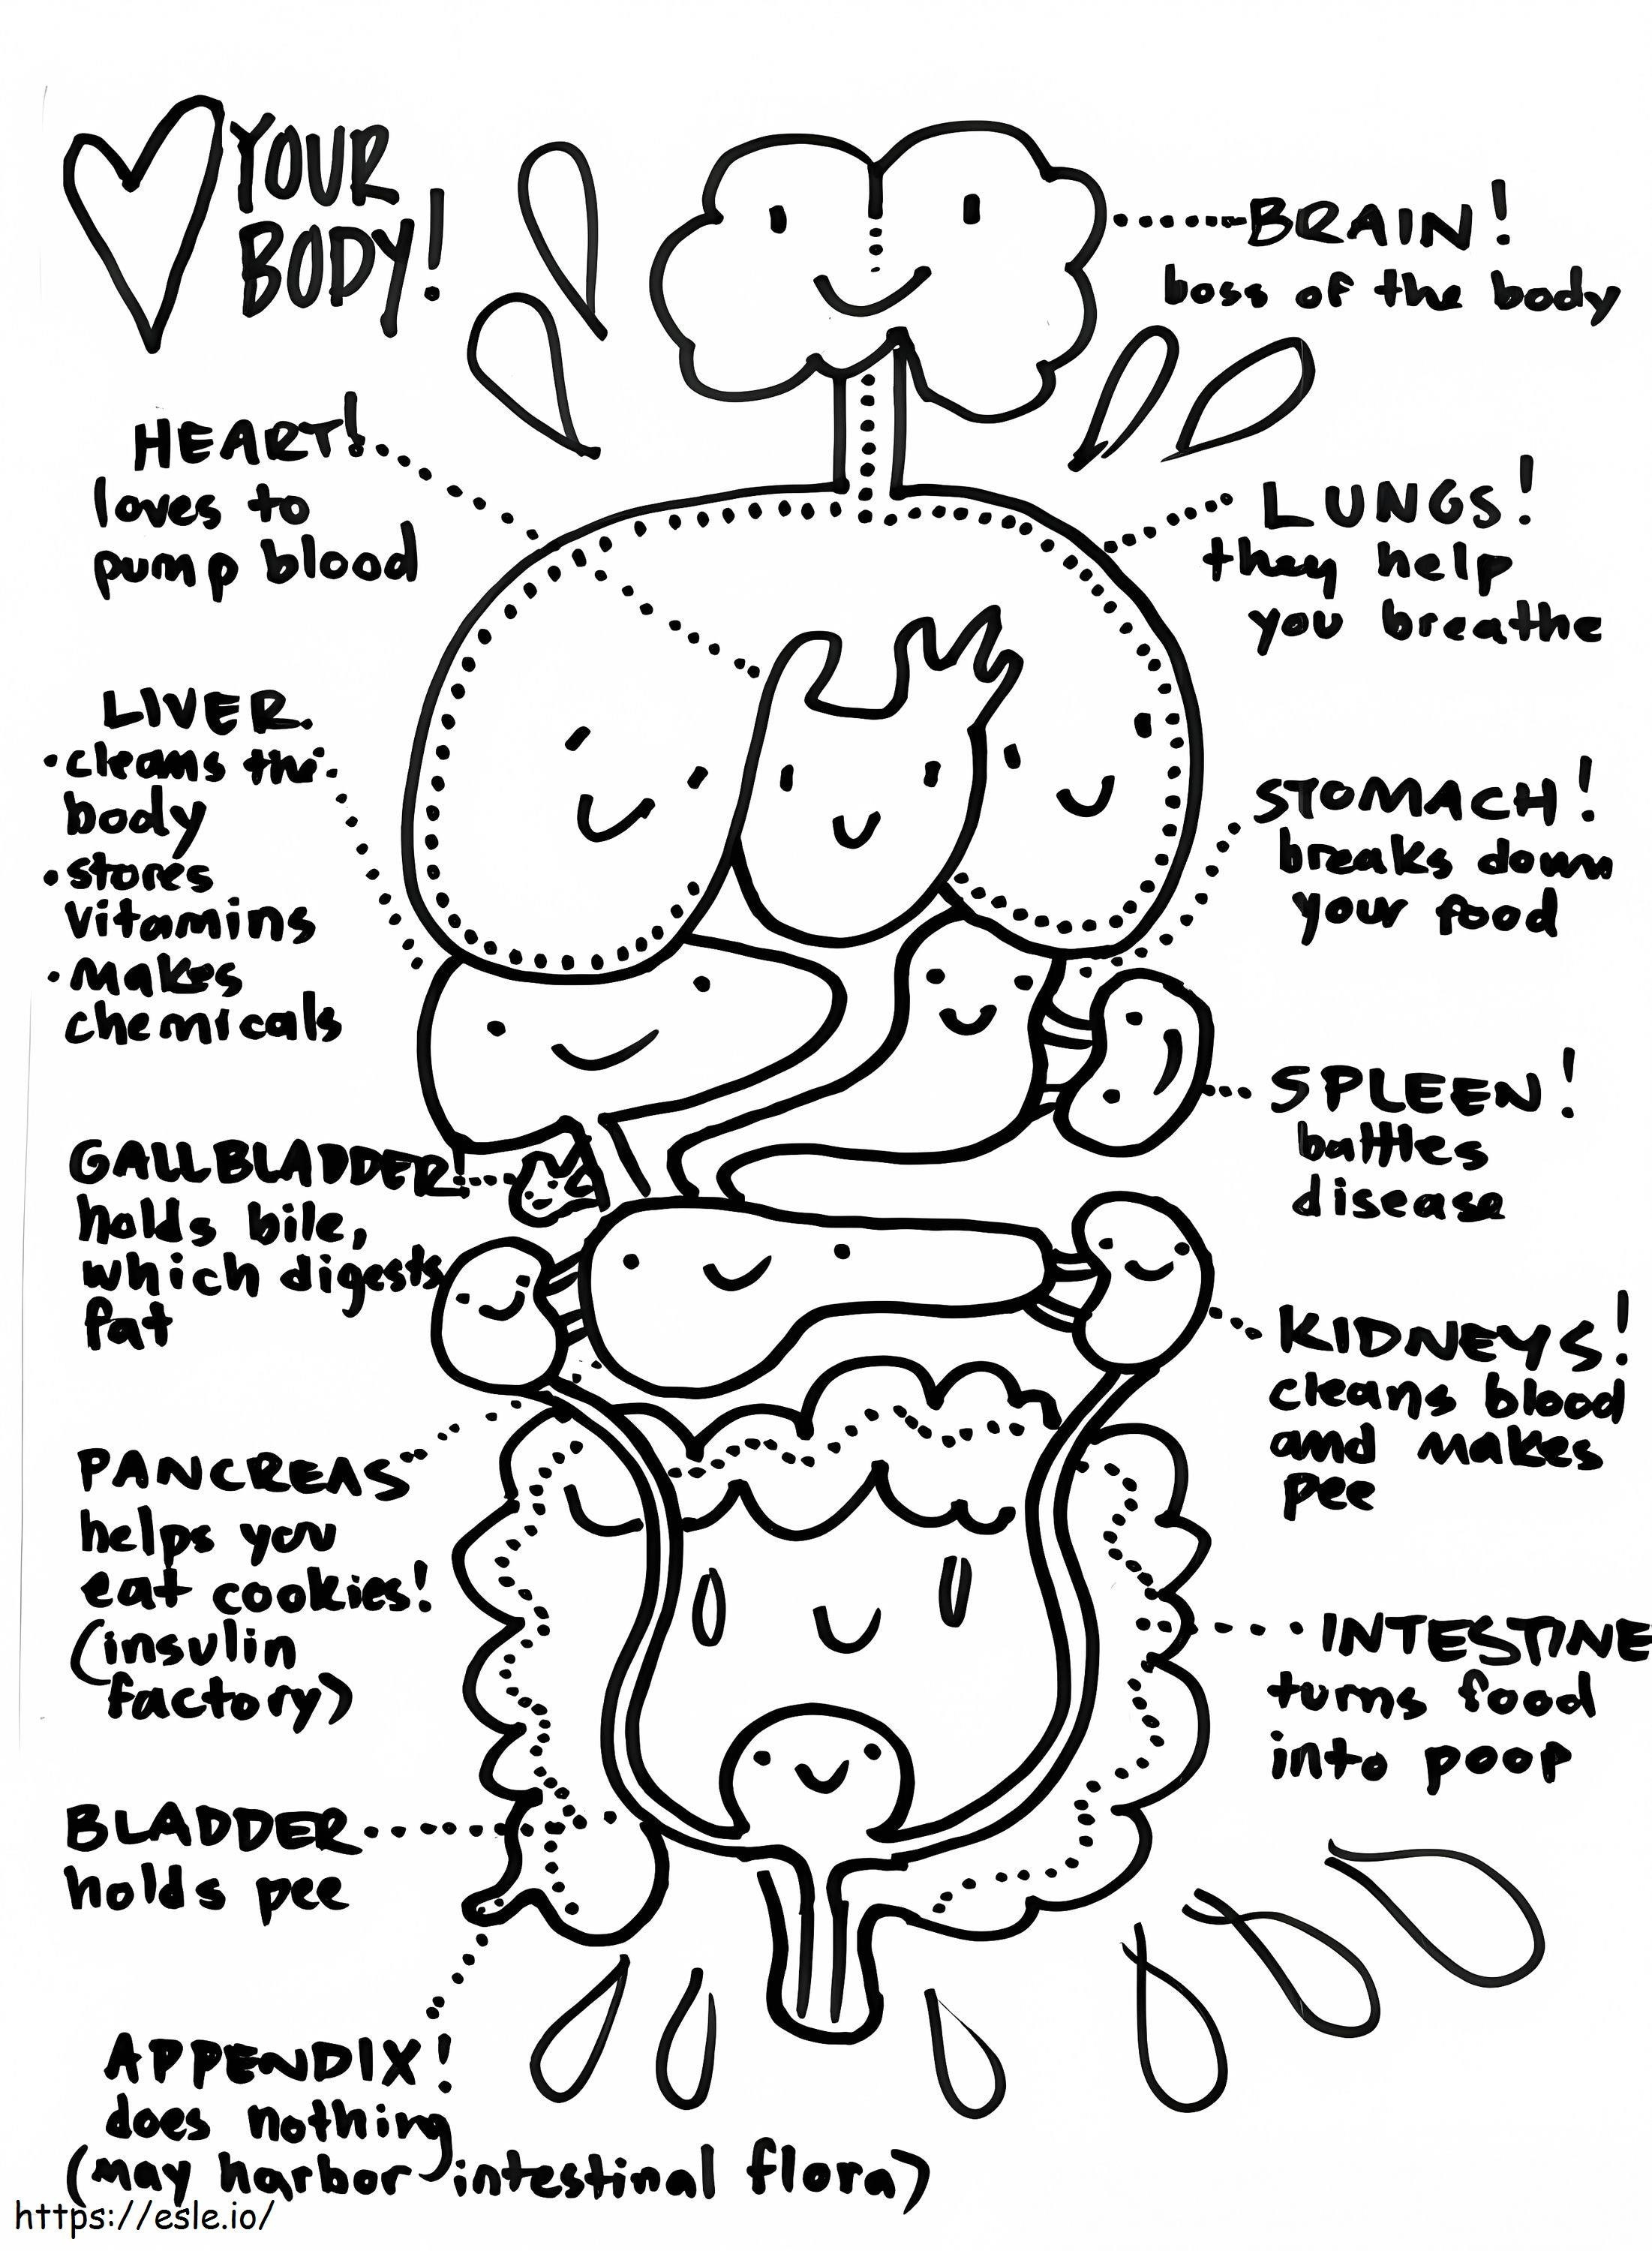 Human Body Systems coloring page